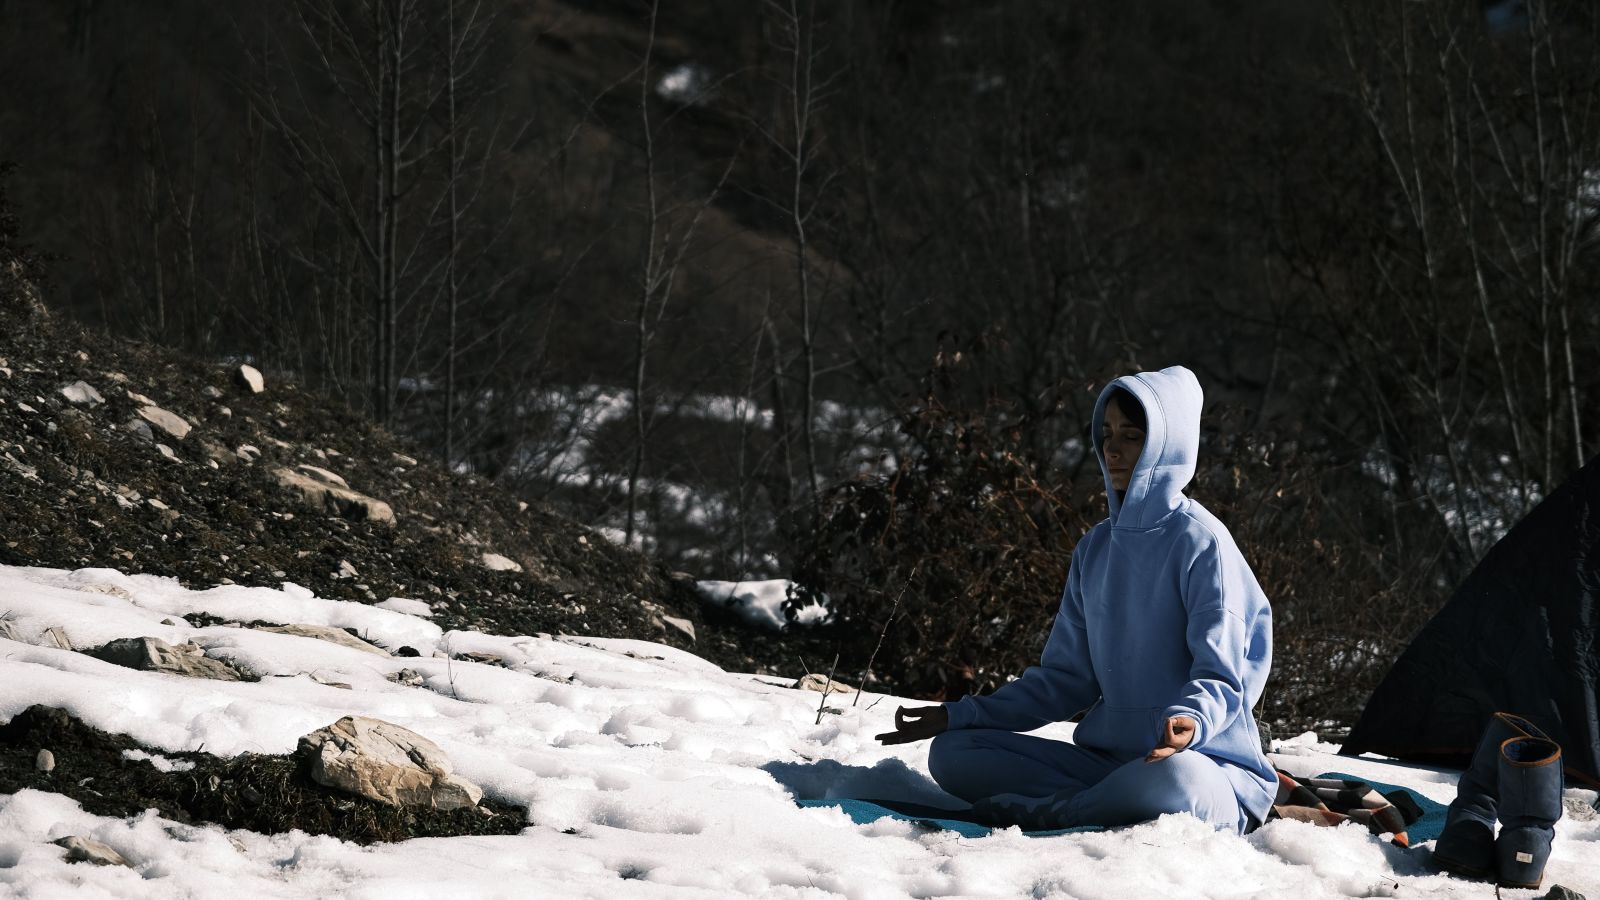 A person meditating amidst snow and rocks on the ground with boulders in the background